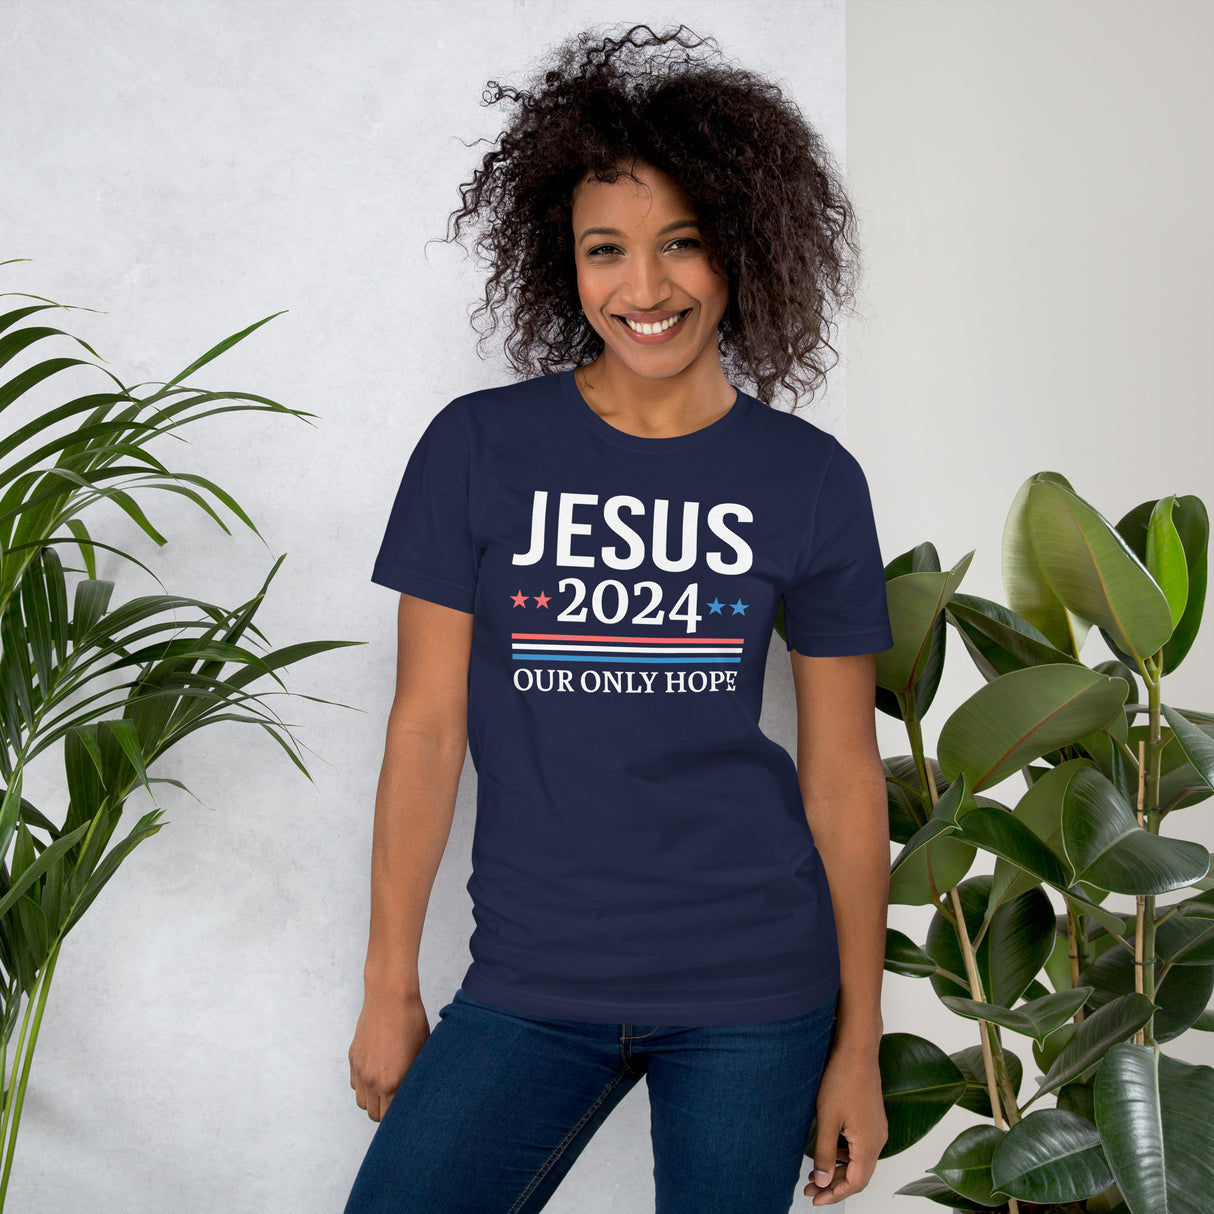 Jesus 2024 Our Only Hope Women's Shirt